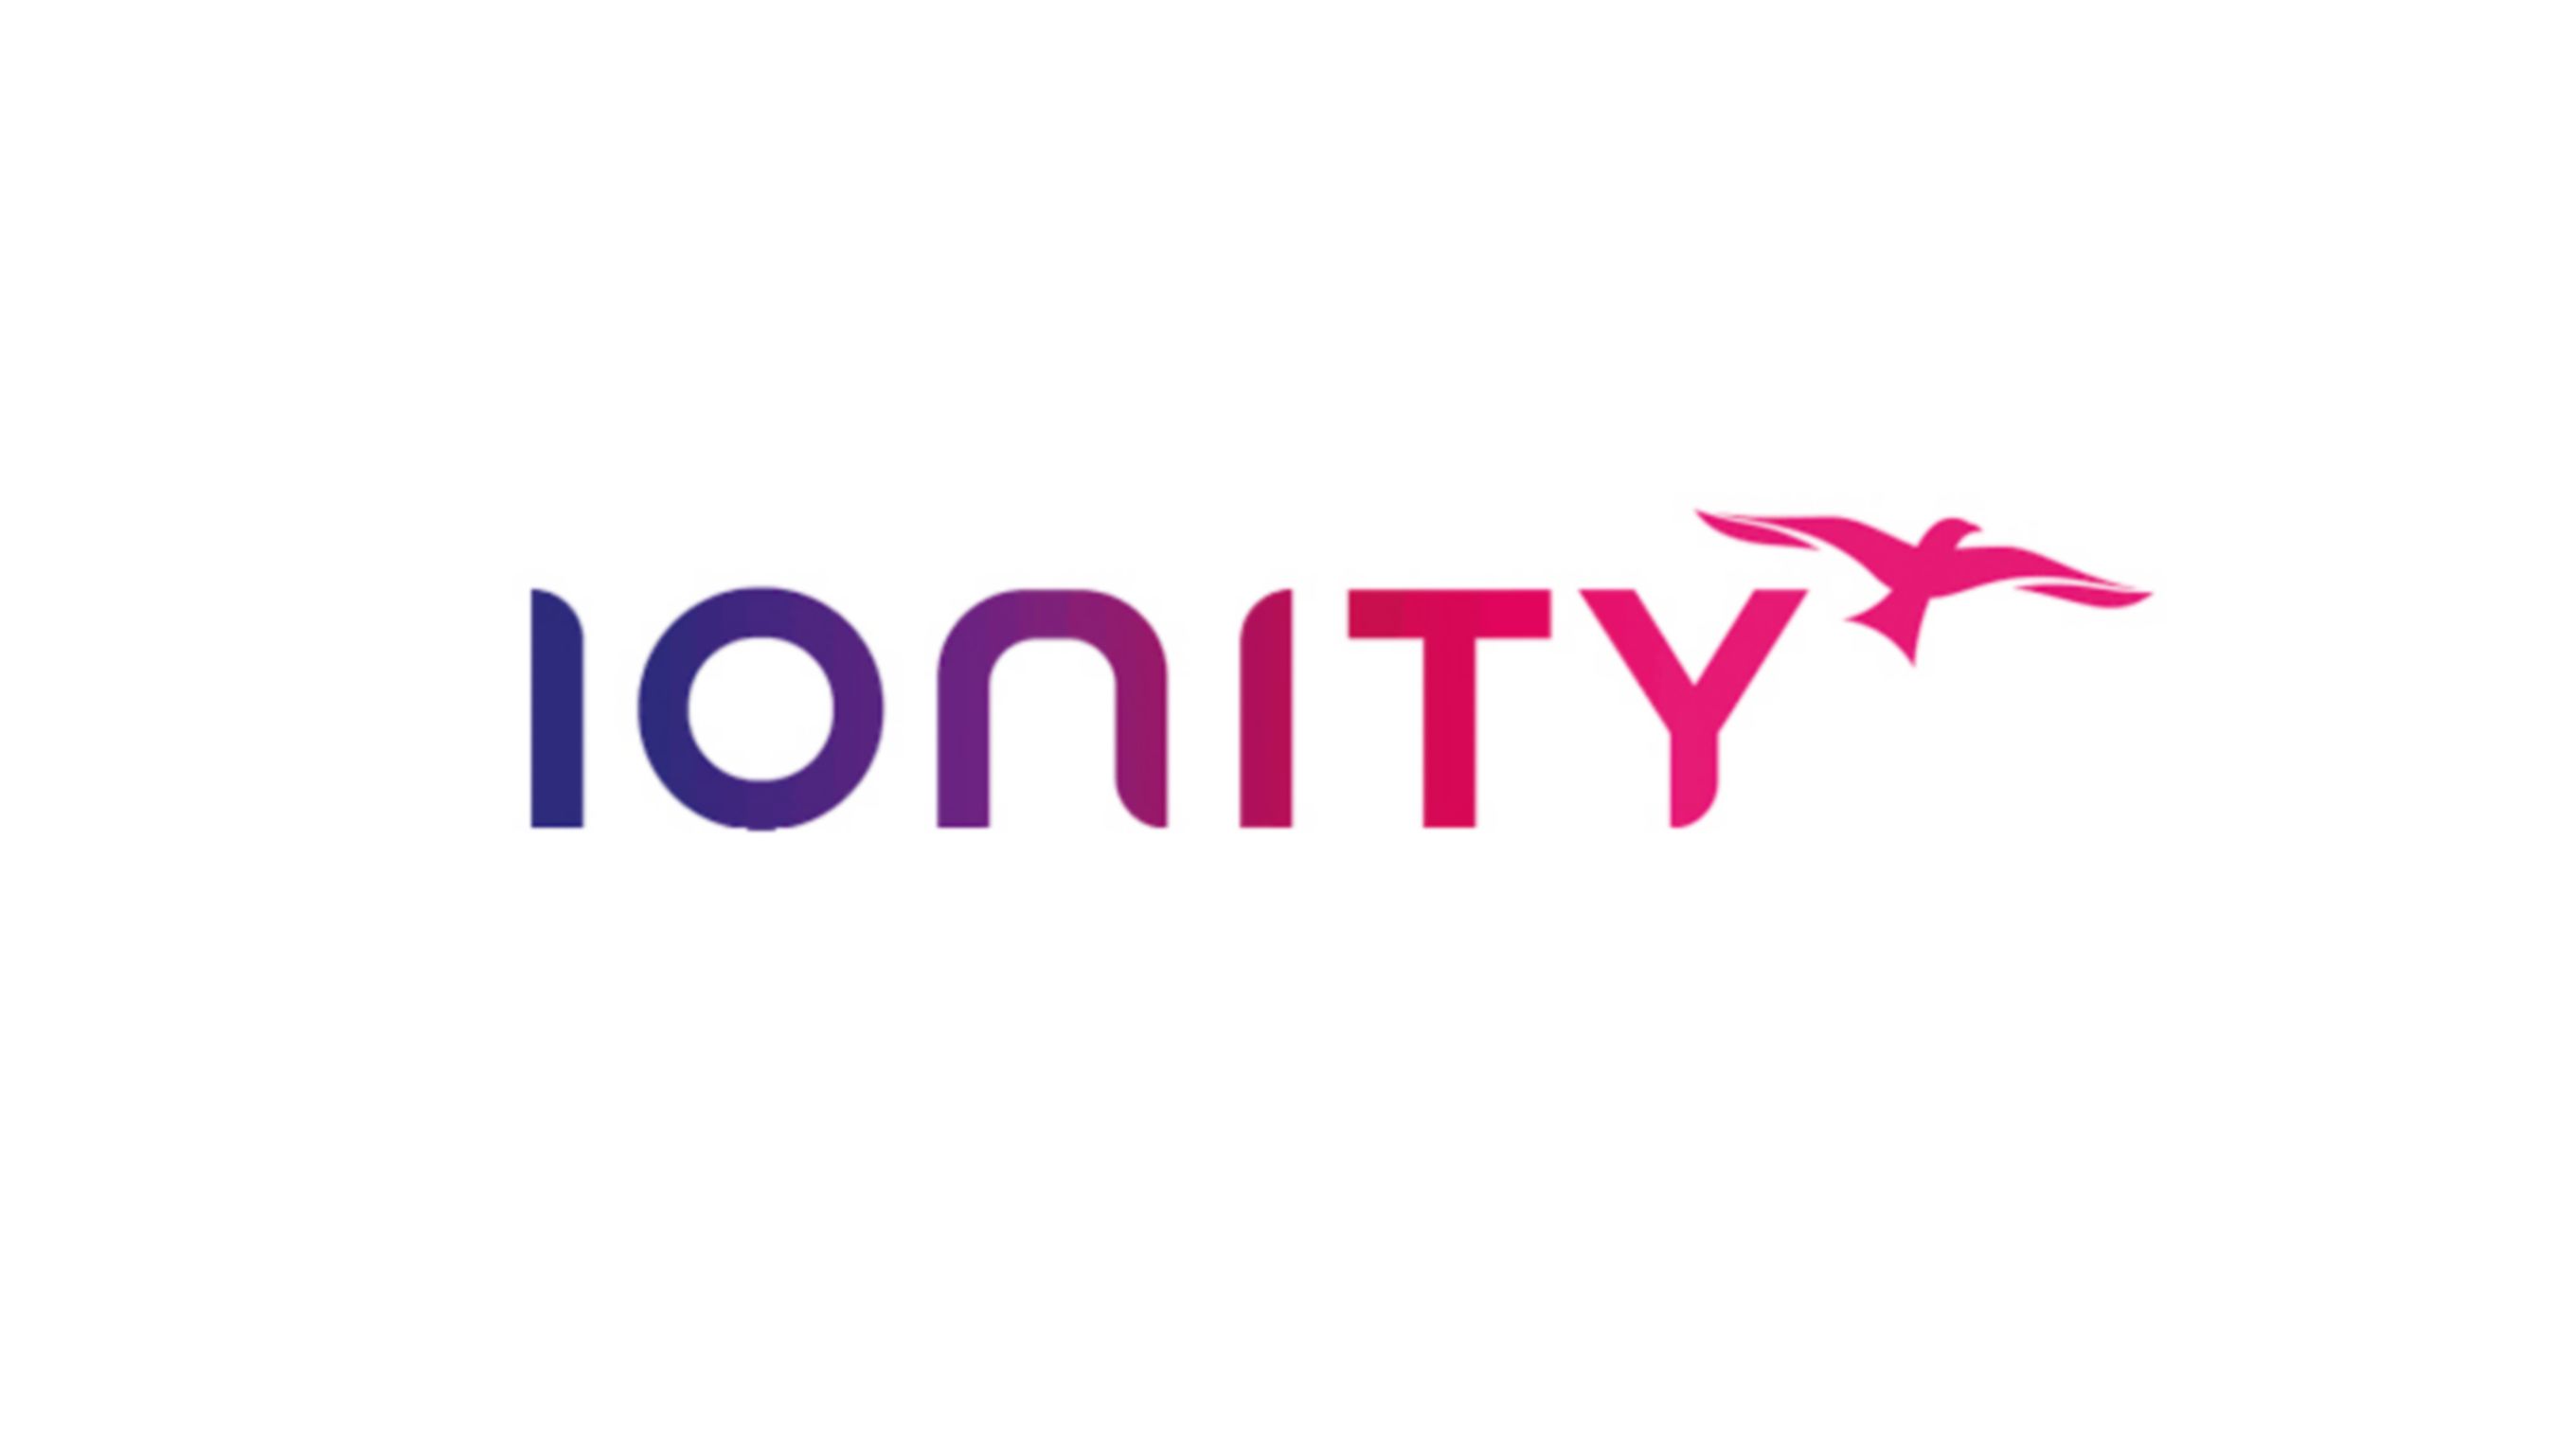 The logo of the joint venture IONITY providing Europe with over 1700 high power charging points.